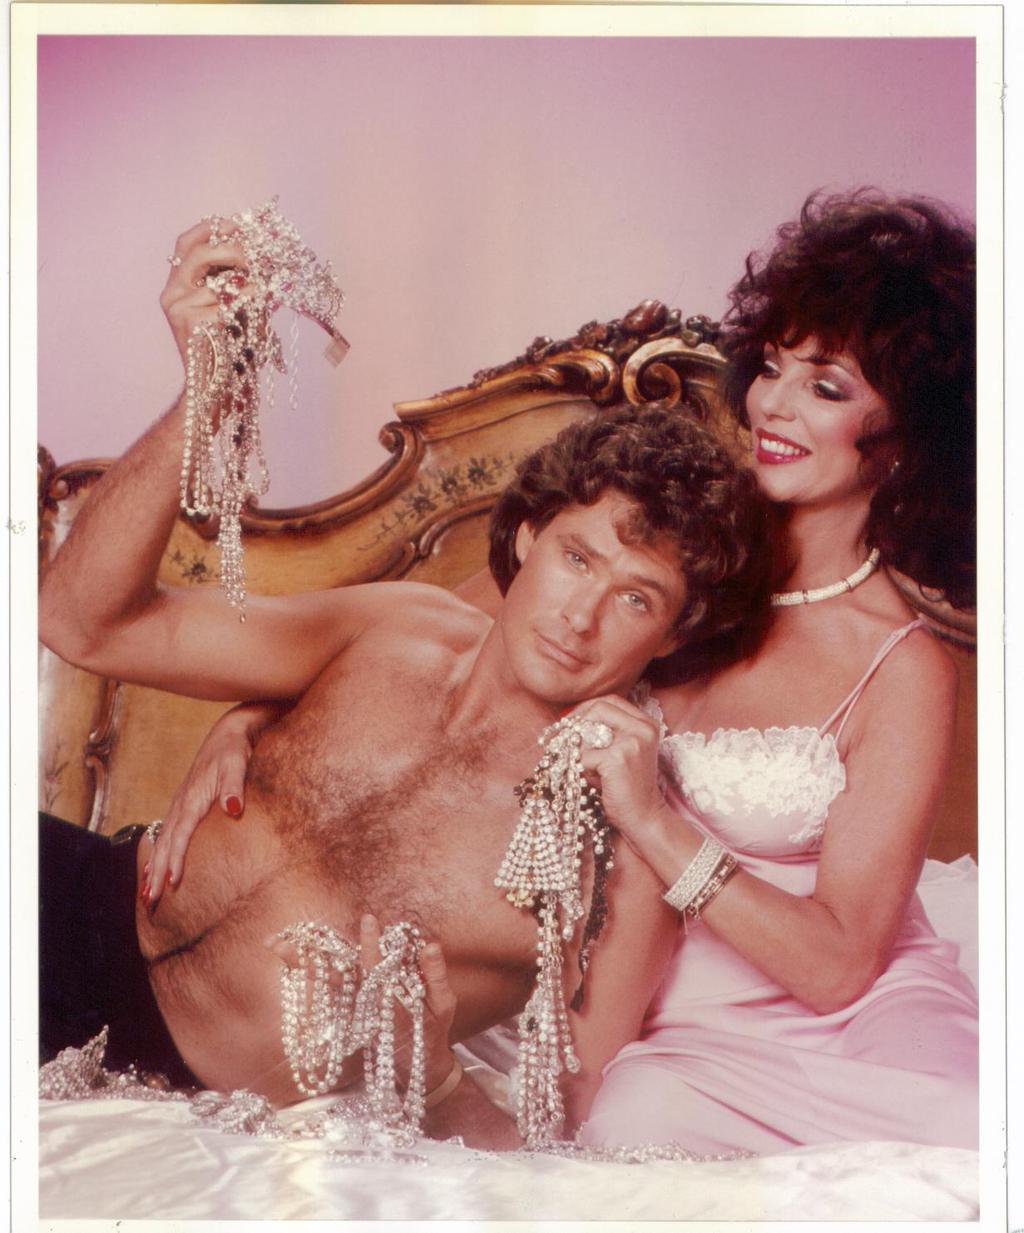 David Hasselhoff and Joan Collins in the 1980's.